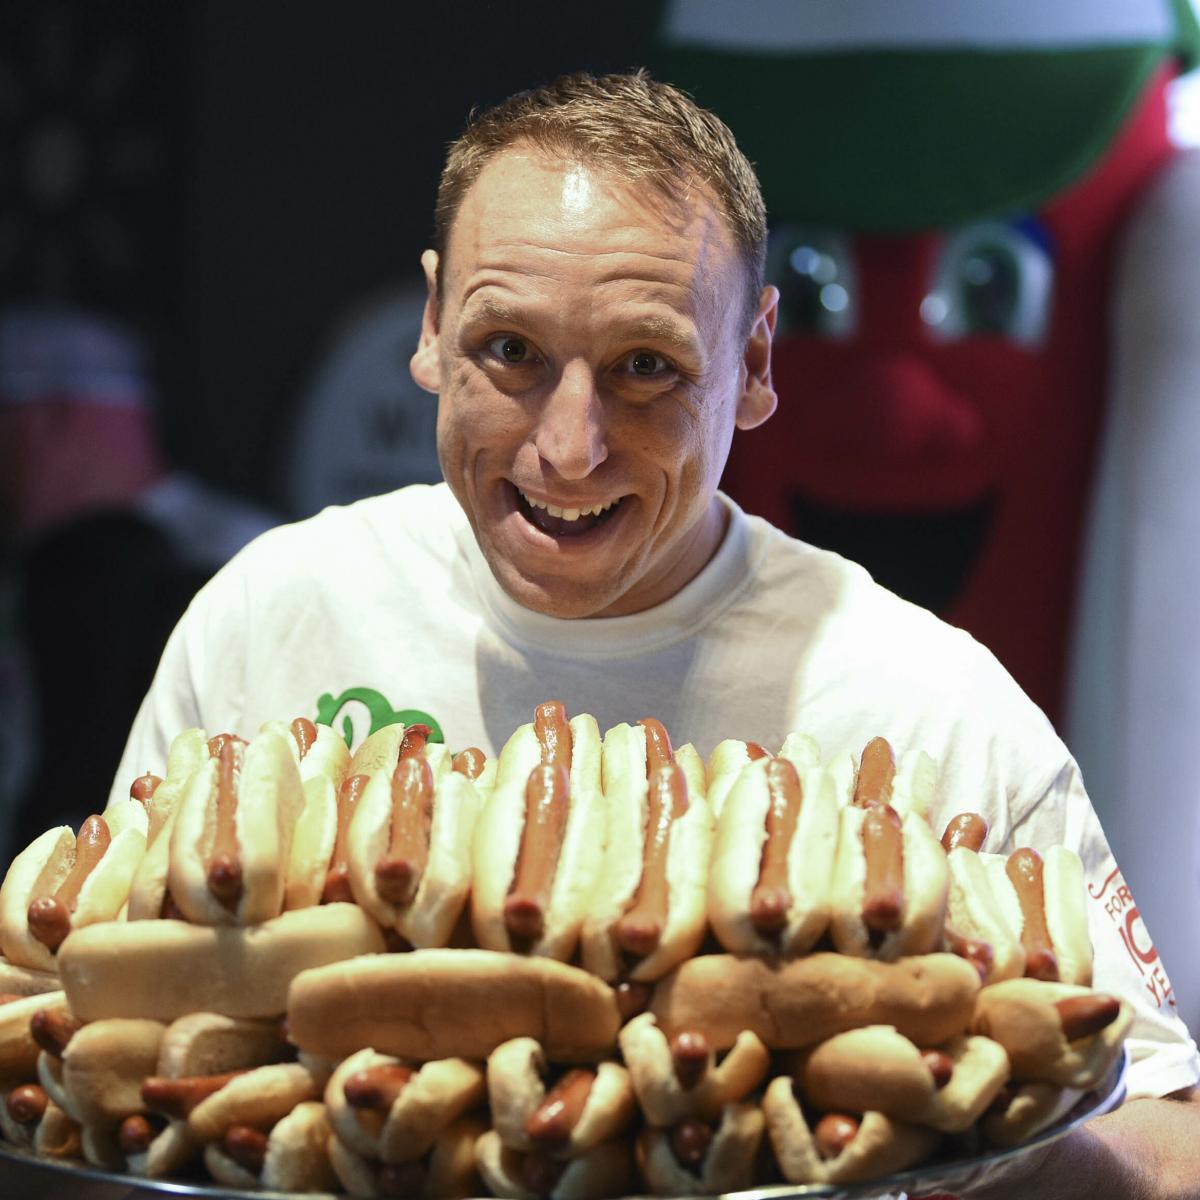 Joey Chestnut WorldRecord 77 Hot Dogs Is 'Doable' in Hot Dog Eating